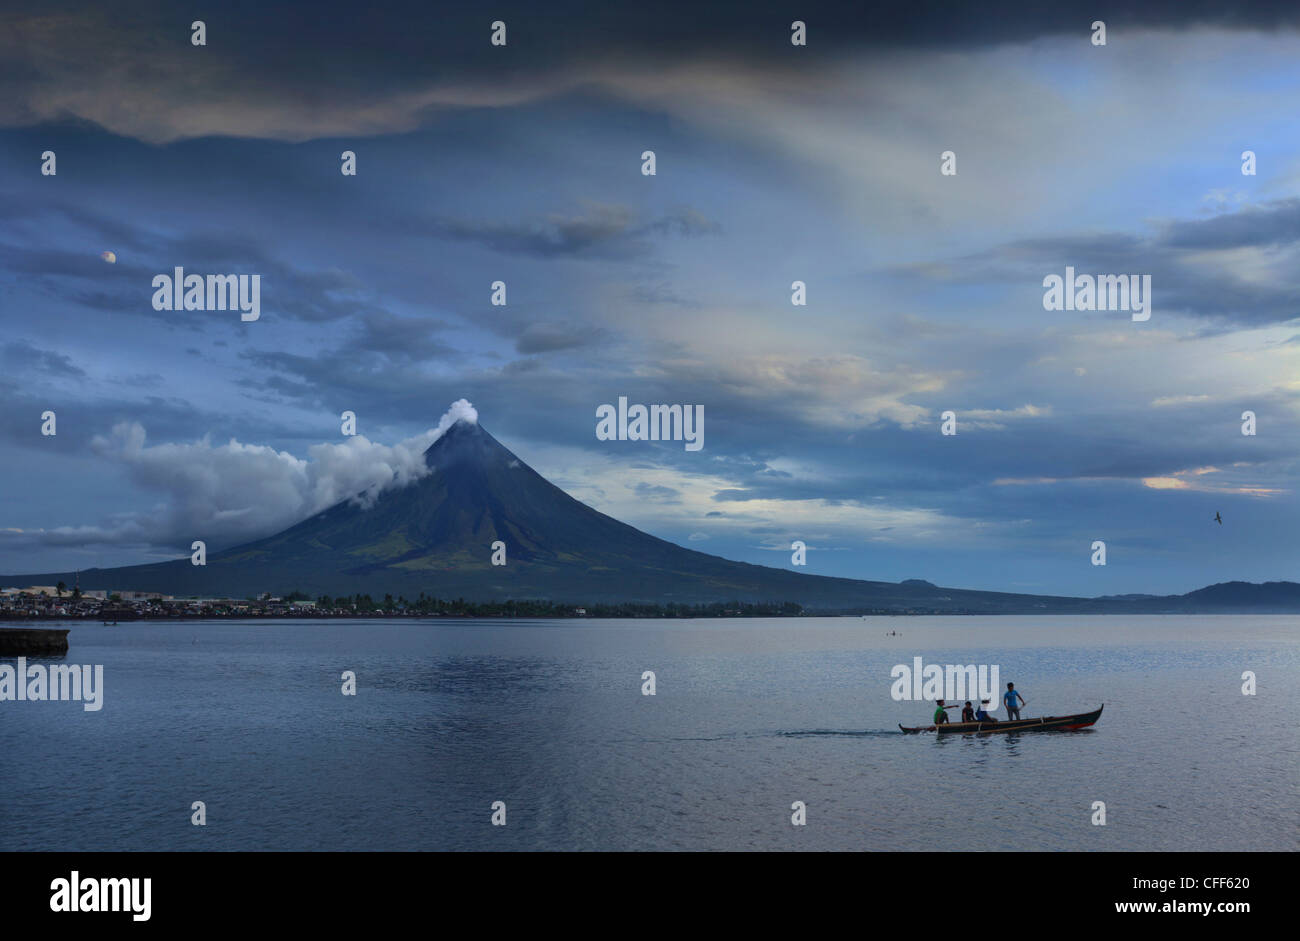 Young people on outrigger with steaming Mayon Volcano, Legazpi City, Luzon Island, Philippines, Asia Stock Photo